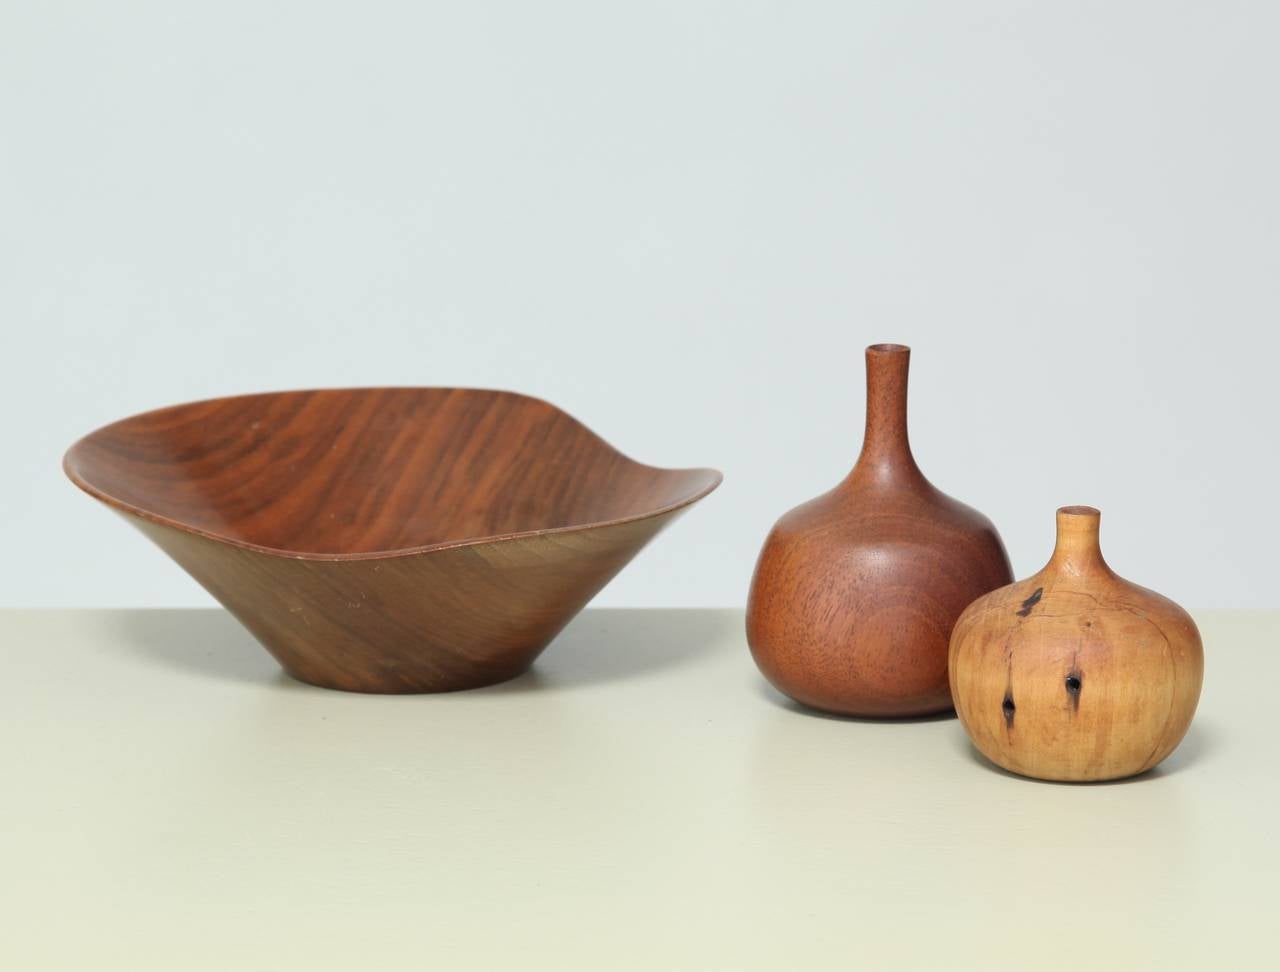 A set of three wooden objects, a bowl and two vases, by the famous American woodturner Rude Osolnik.

Dimensions are:
Bowl: height: 6.5 cm | diameter: 19 cm.
Larger vase: height: 10 cm | diameter: 8 cm.
Smaller vase: height: 7 cm | diameter: 7